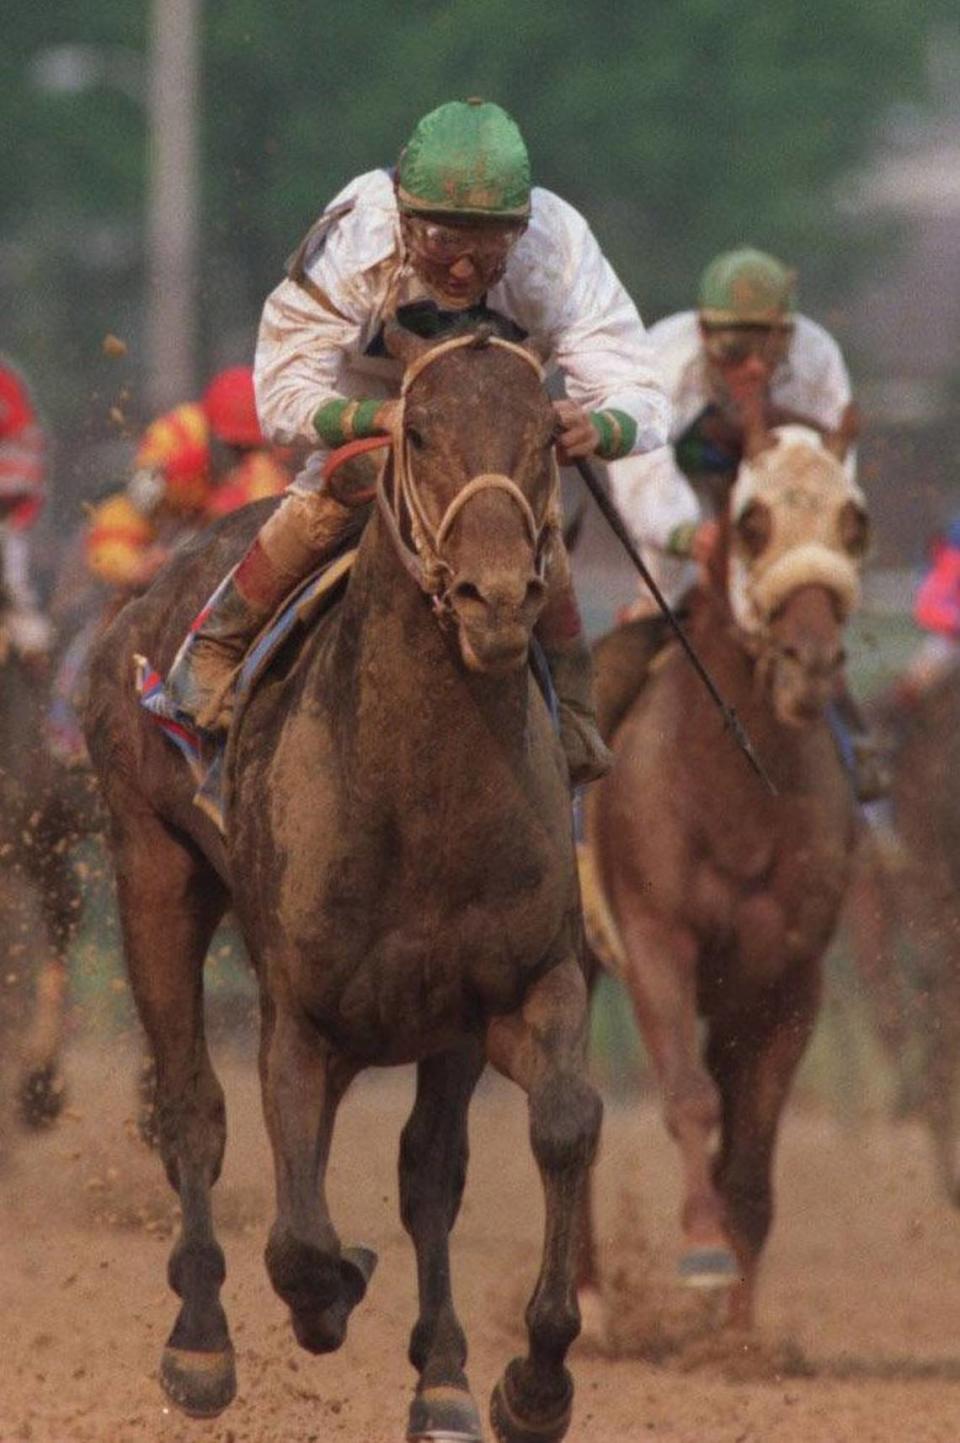 Grindstone won the 1996 Kentucky Derby by a nose over Cavonnier. That race was the most recent Run for the Roses decided by a nose until Saturday’s win by Mystik Dan. Frank Anderson/Herald-Leader File Photo